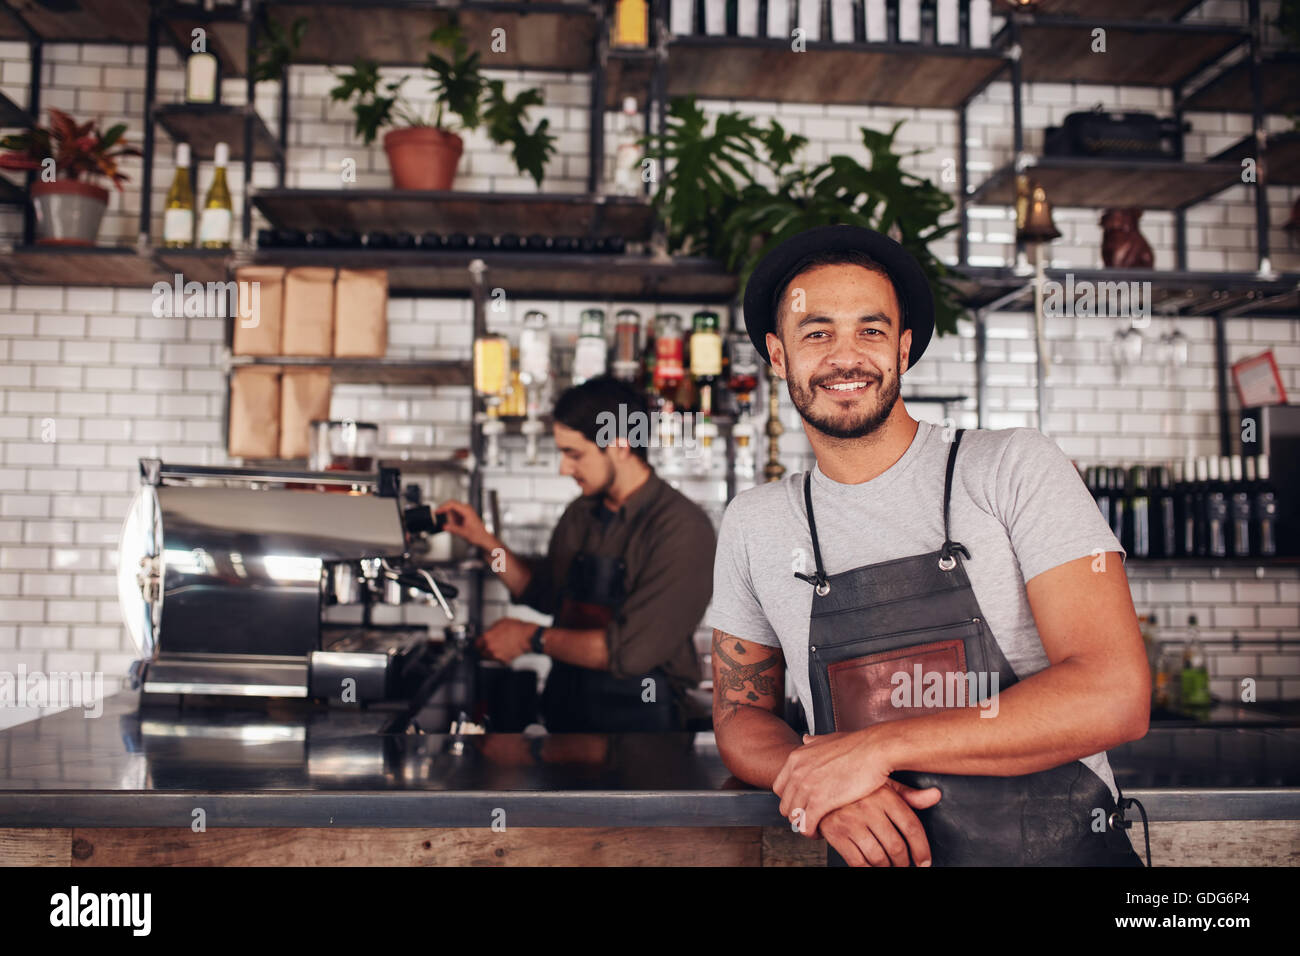 Portrait of male coffee shop owner standing at the counter with barista working in background making drinks. Stock Photo